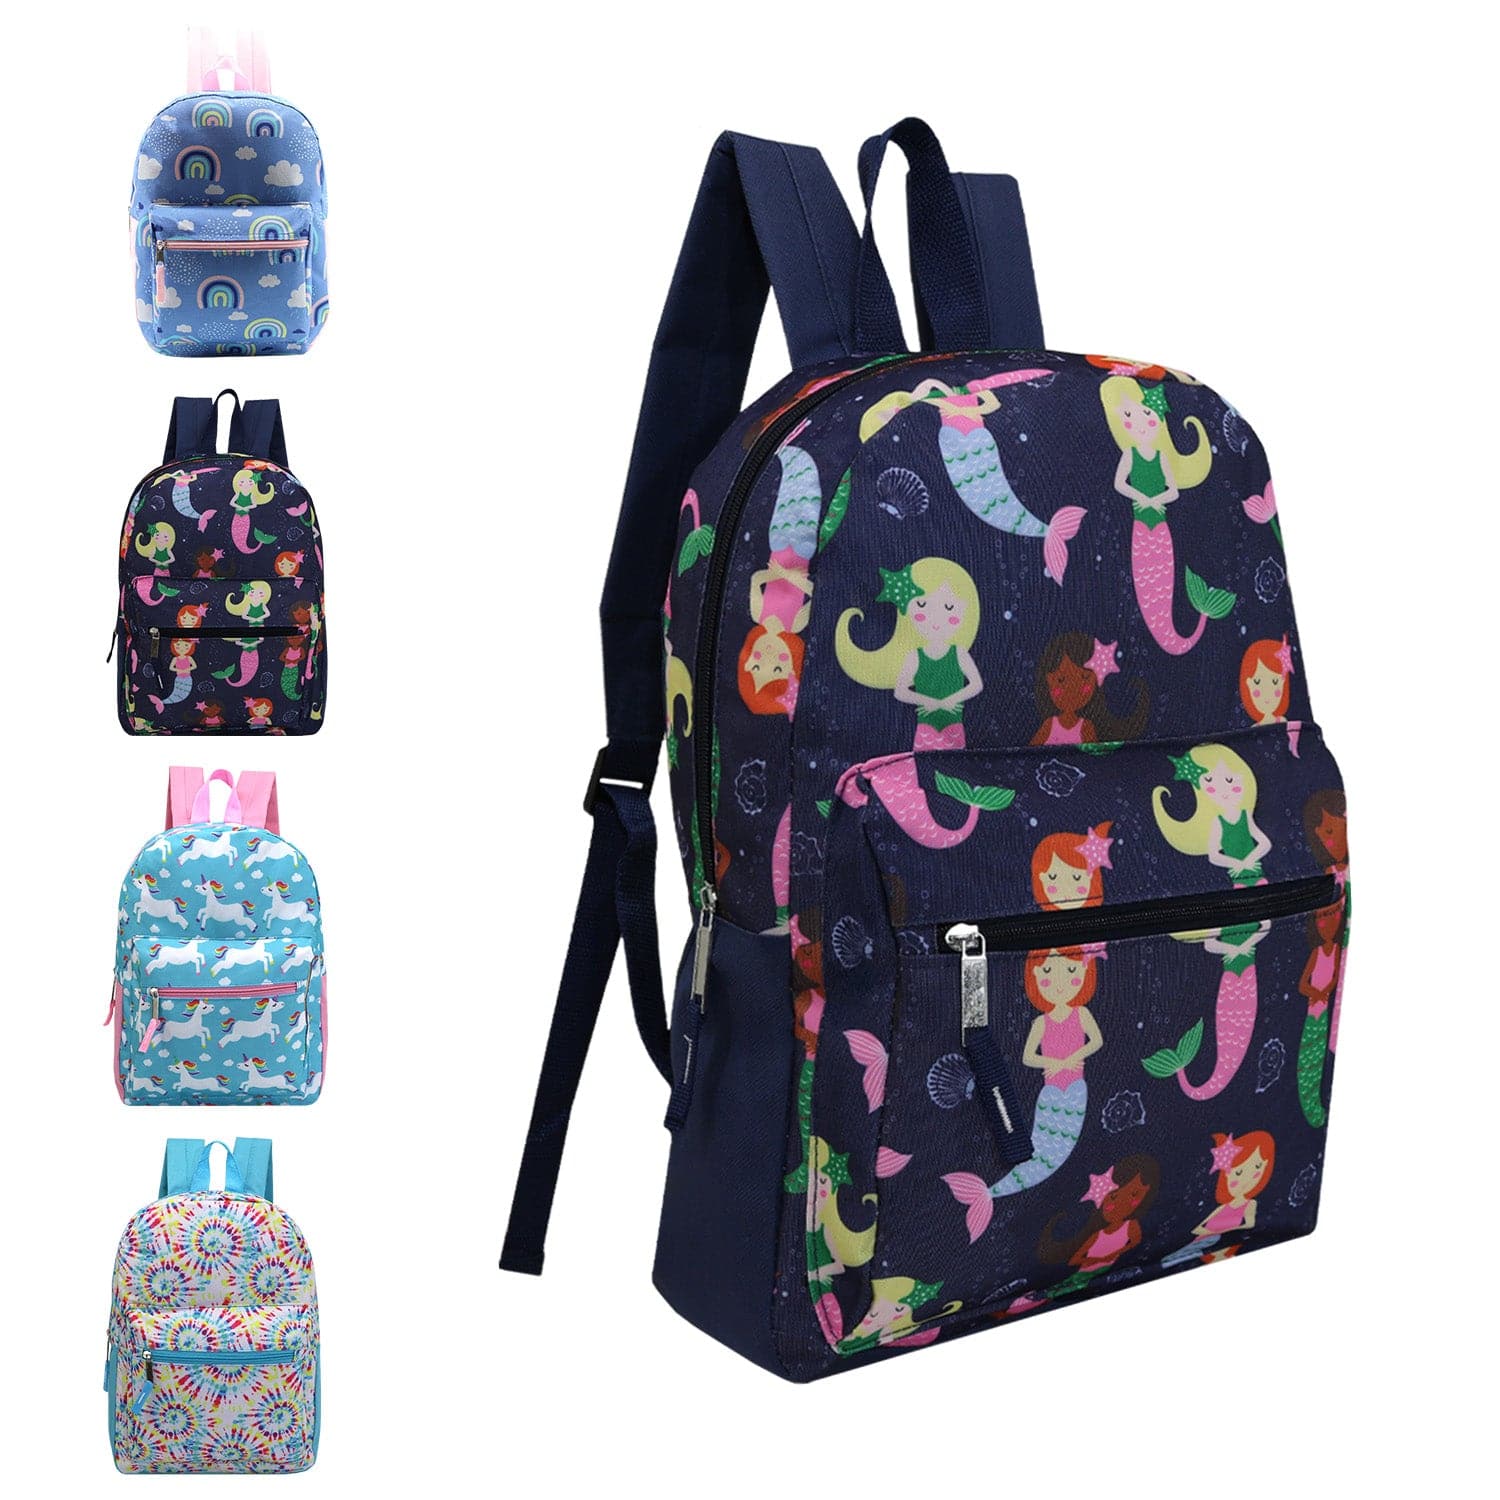 12 Wholesale Kids 15" Backpacks and 12 Bulk School Supply Kits of Your Choice